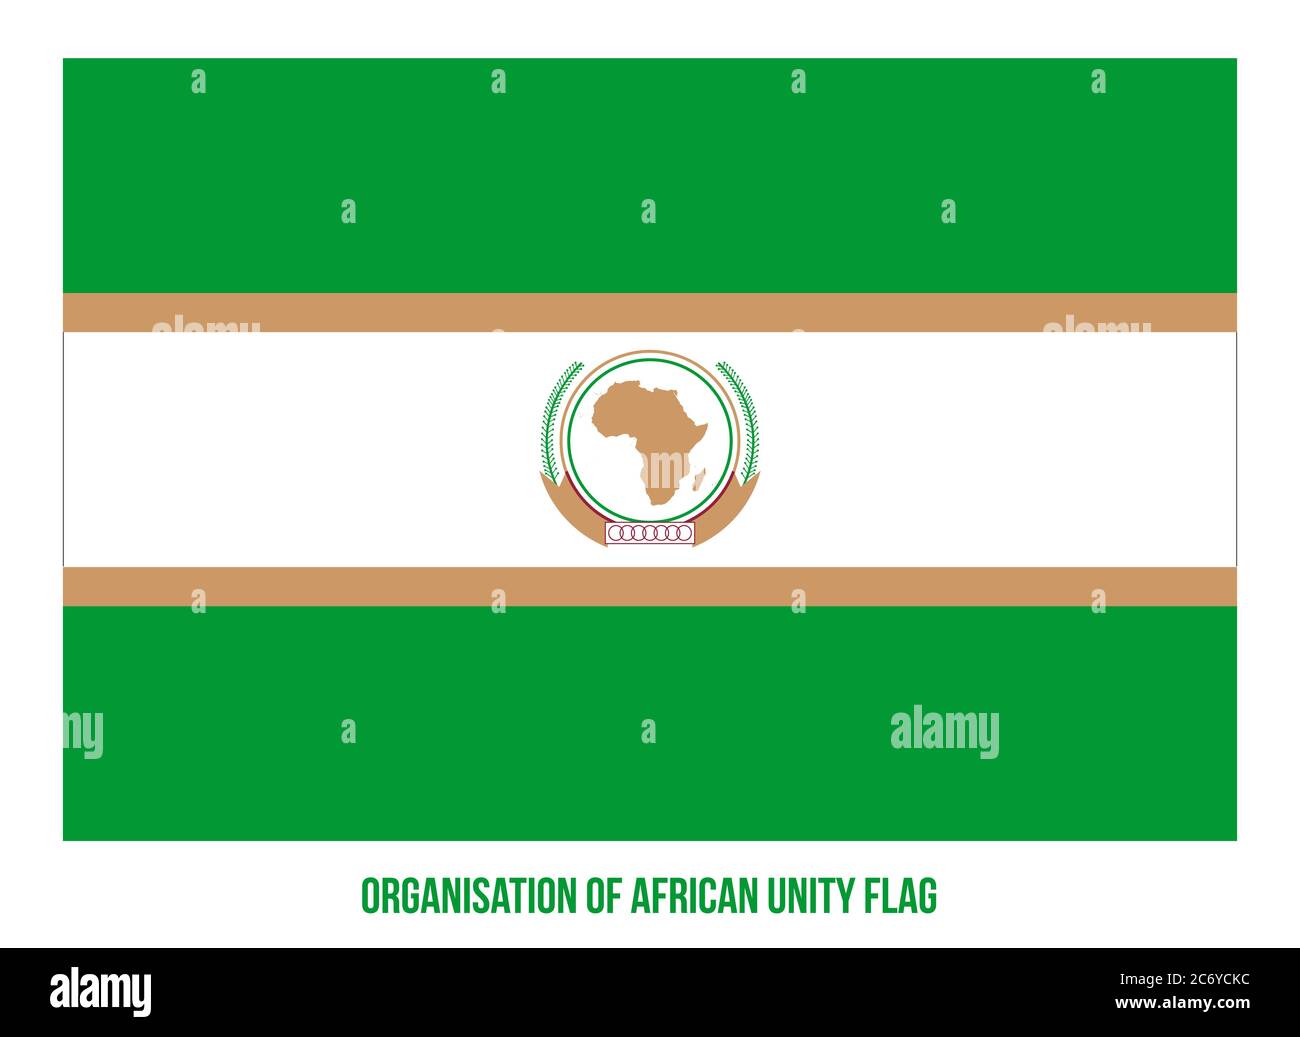 Organisation of African Unity Flag Vector Illustration on White Background. Stock Vector